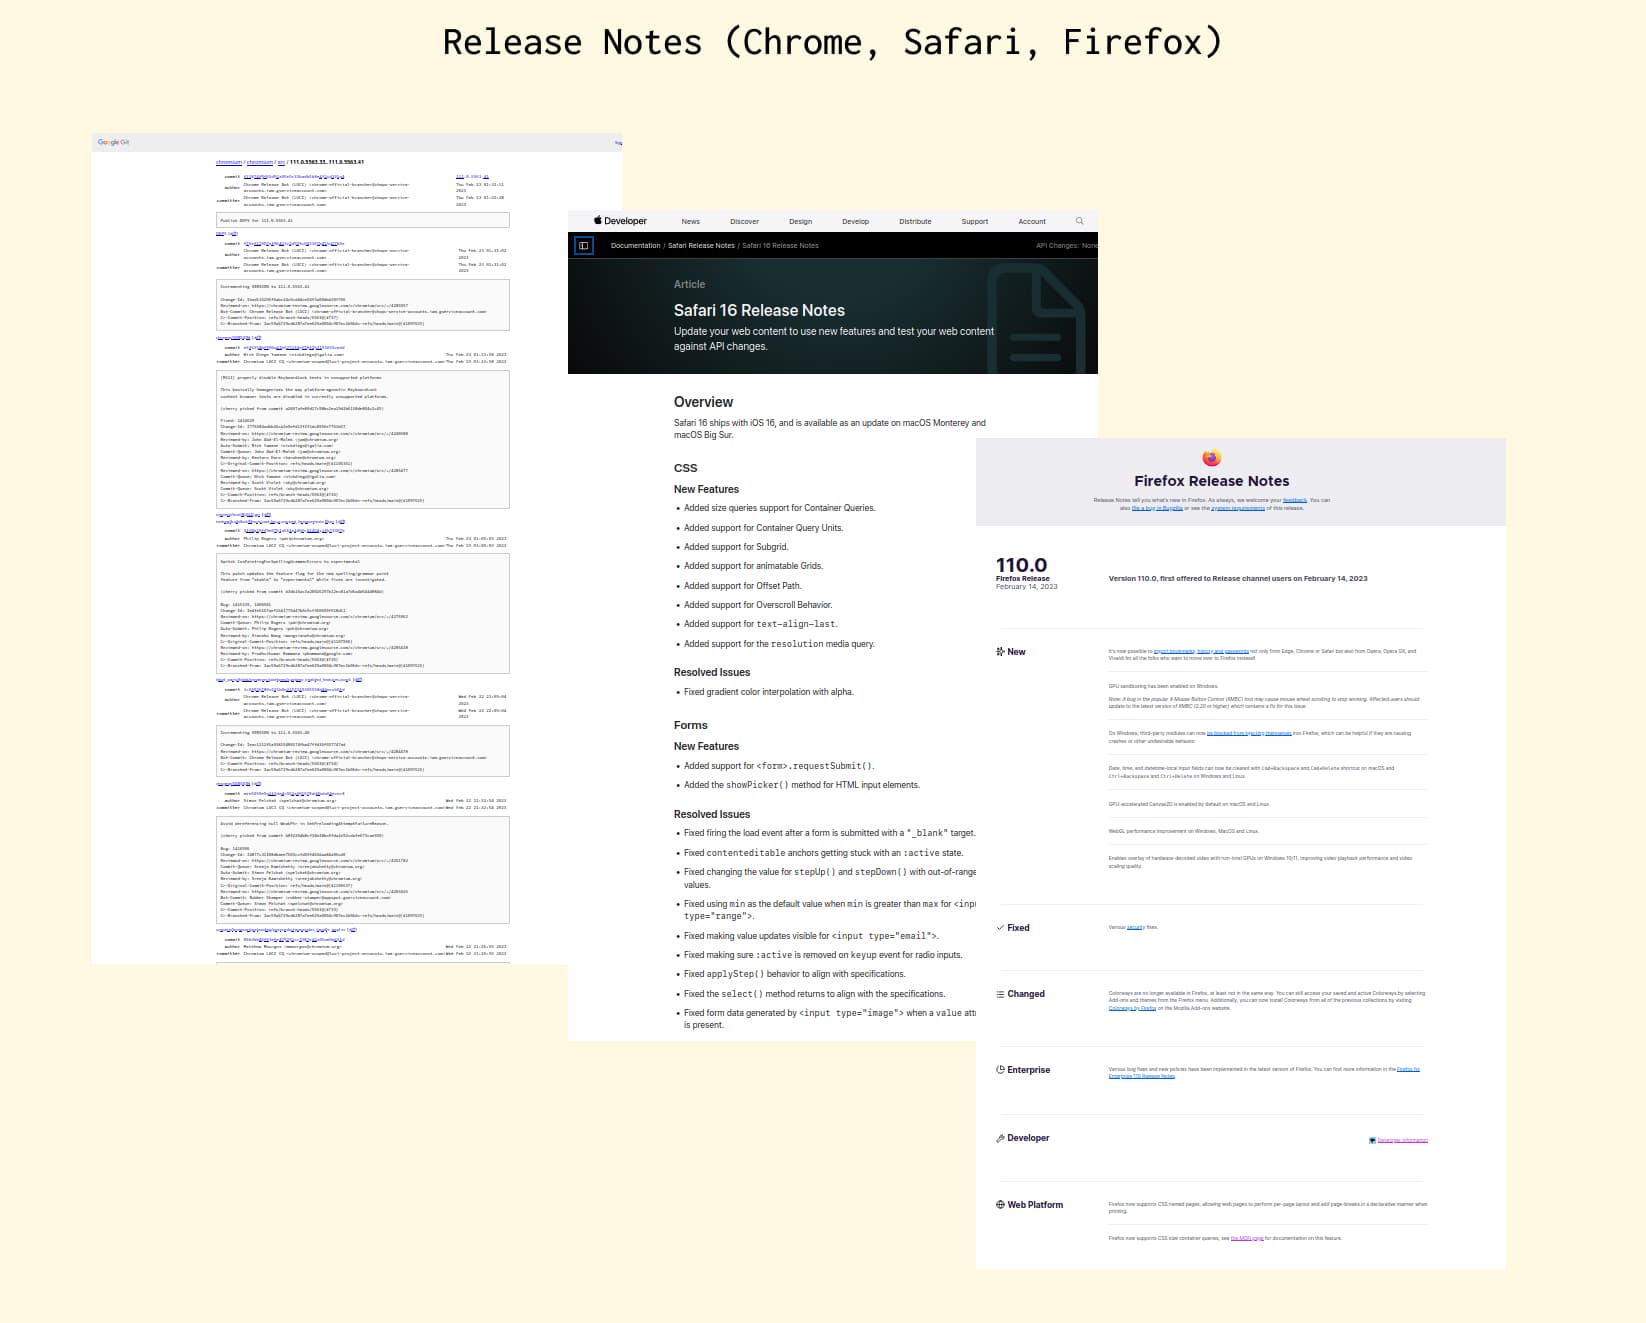 a screenshot of the release notes from each of the major browsers side by side. From left to right: chrome, safari, and firefox.